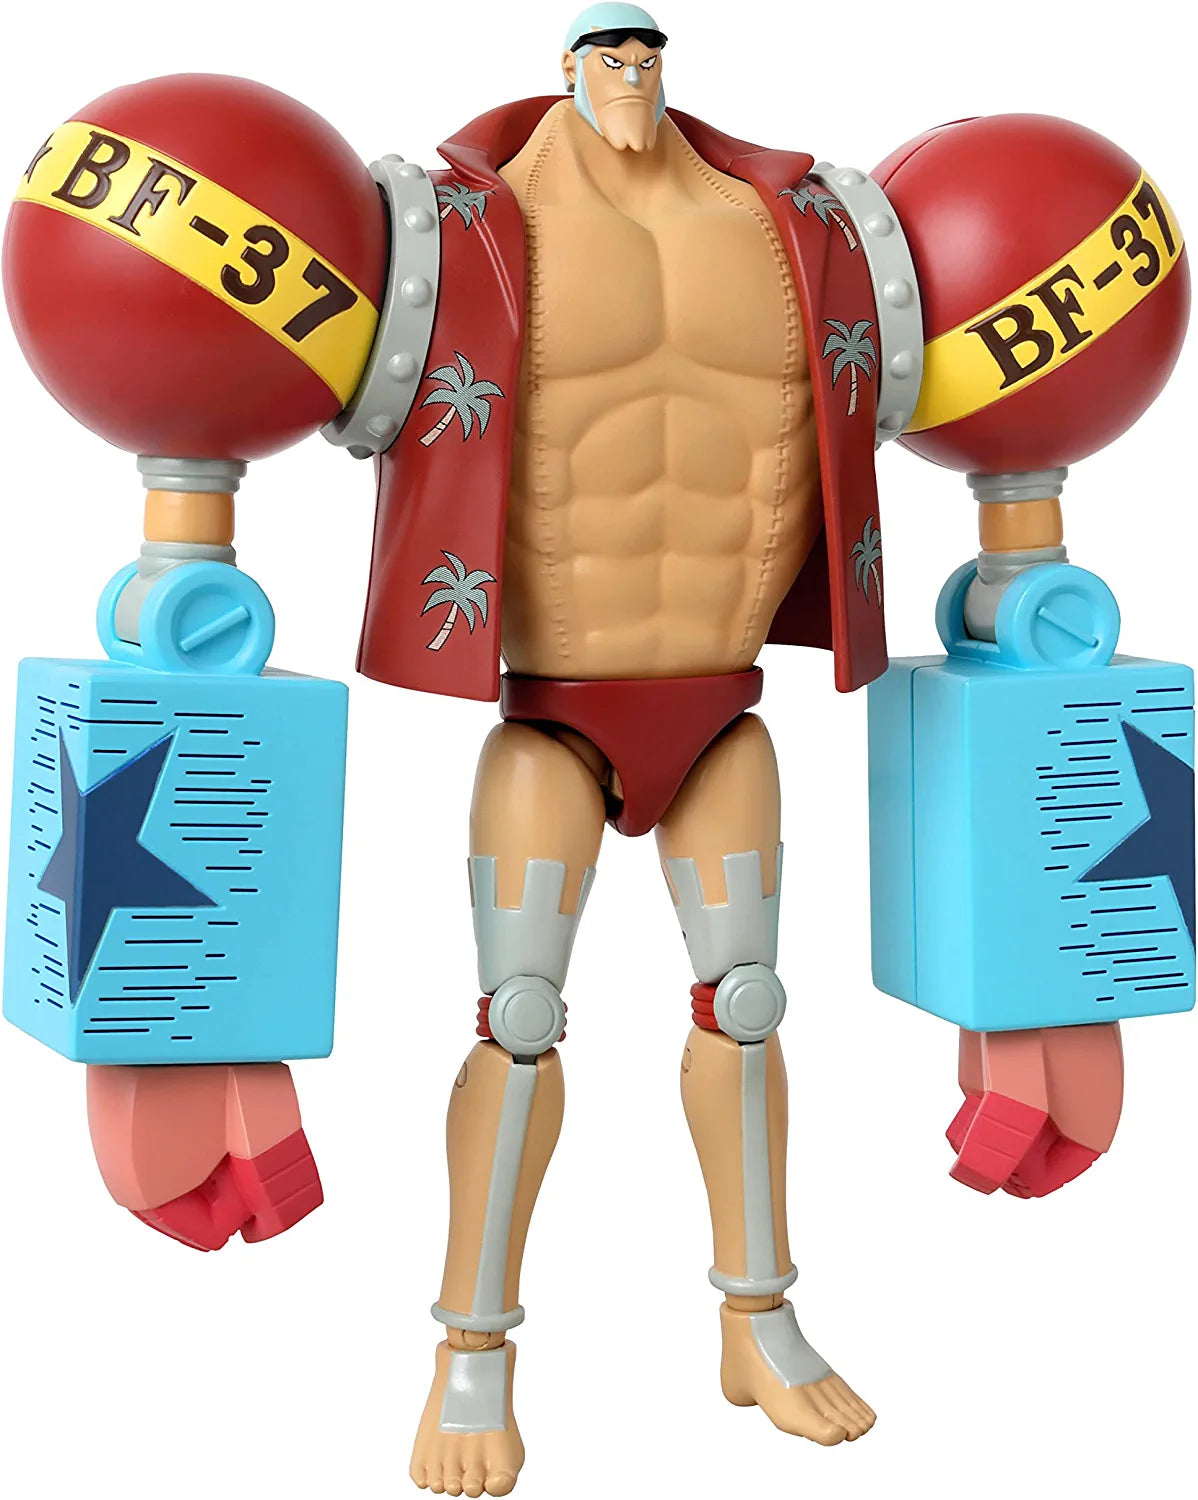 Anime Heroes - One Piece - Franky Action Figure